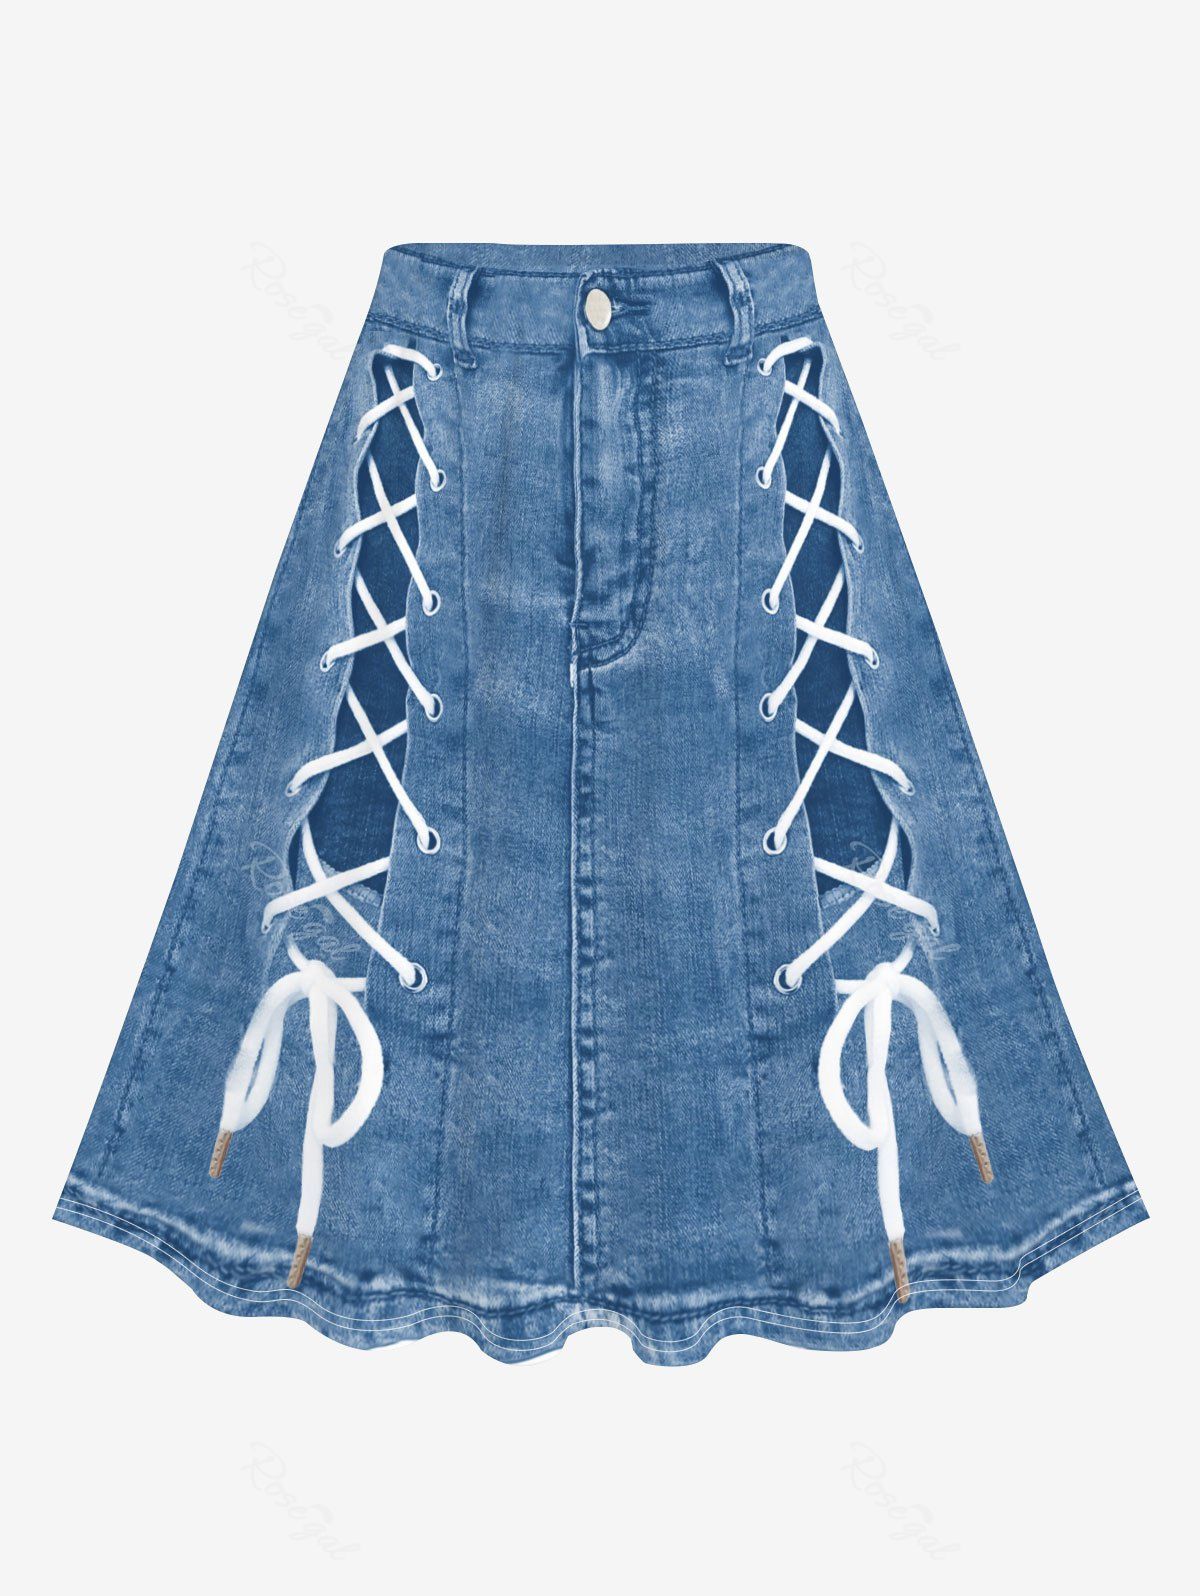 Trendy Plus Size 3D Jeans Lace Up Printed Skirt  